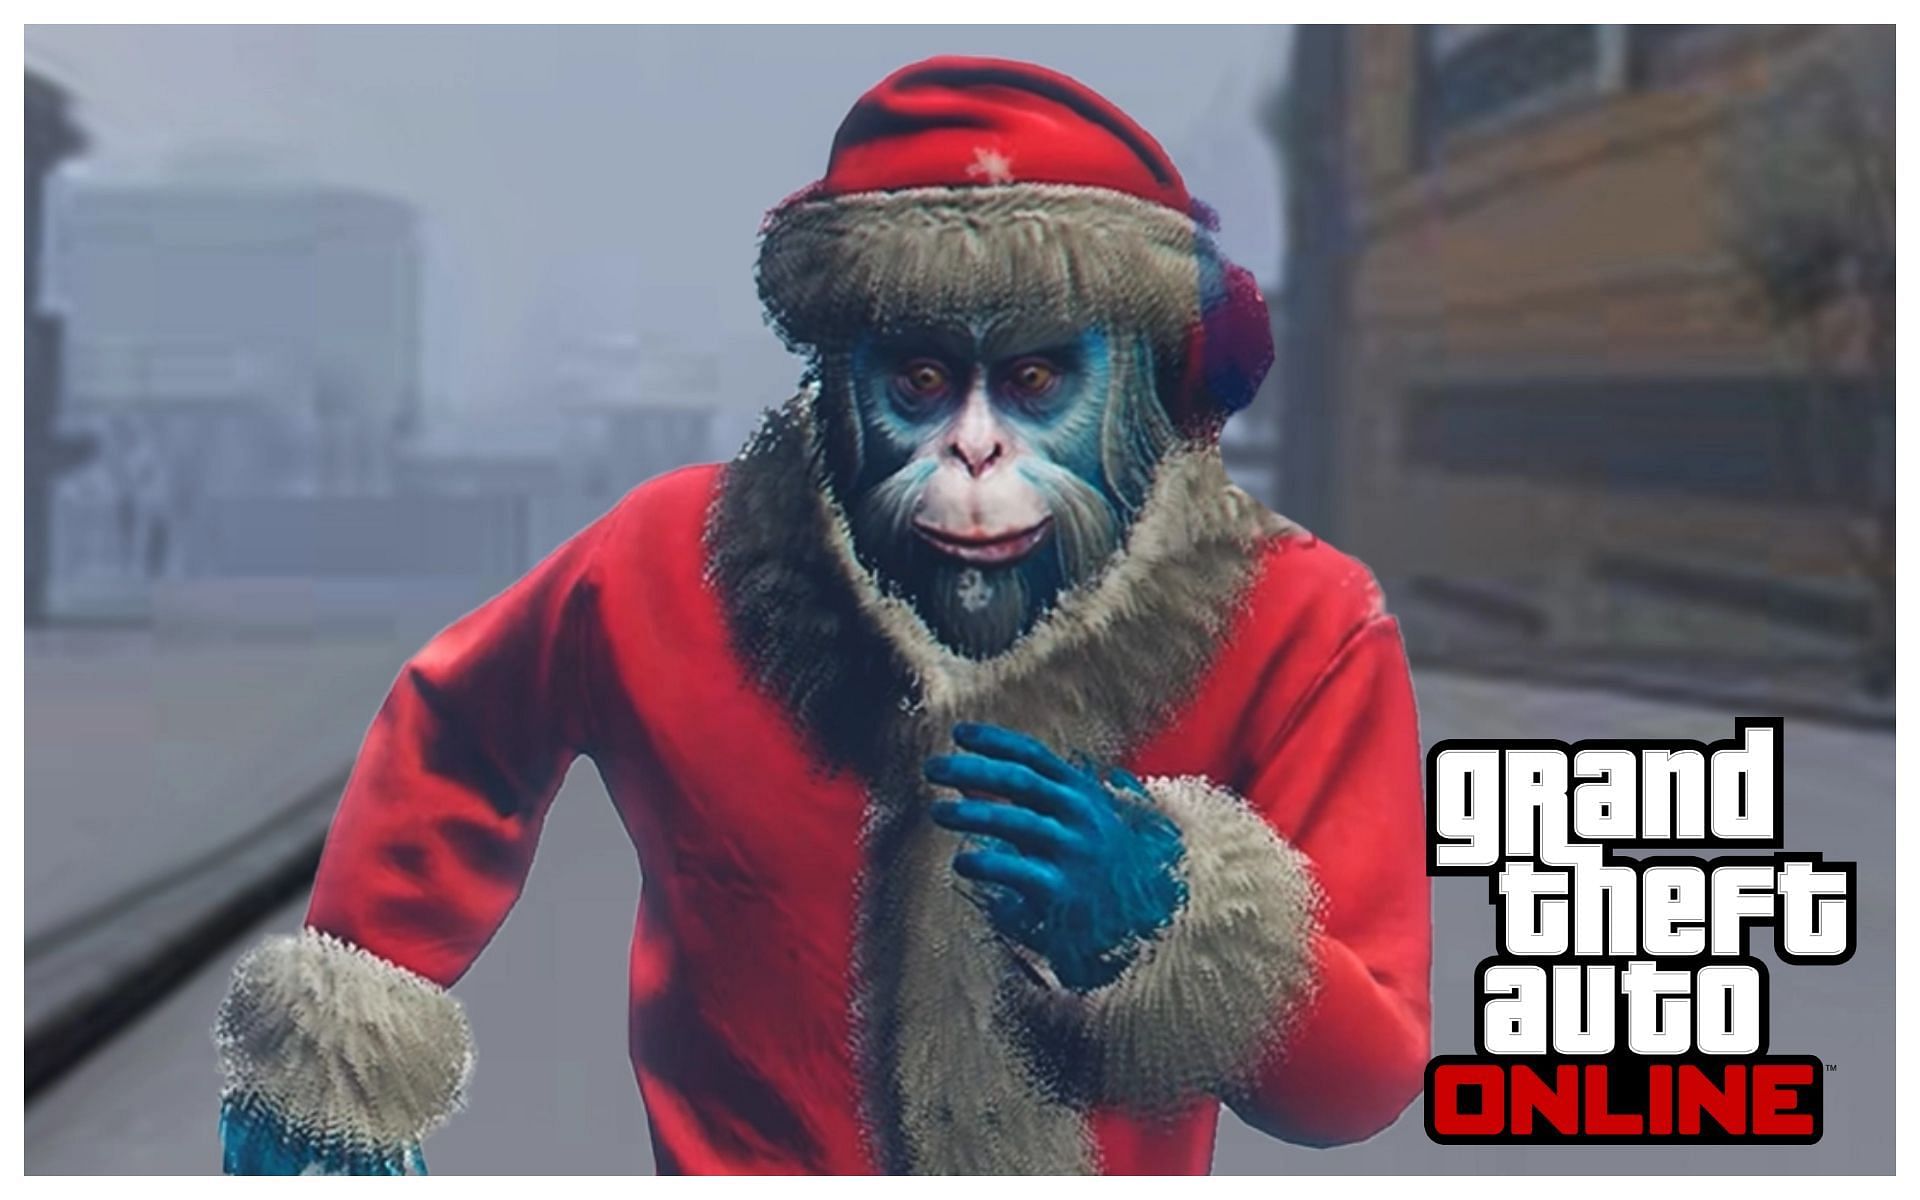 This is a character that GTA Online players are going to love to hate (Images via charlieintel.com)